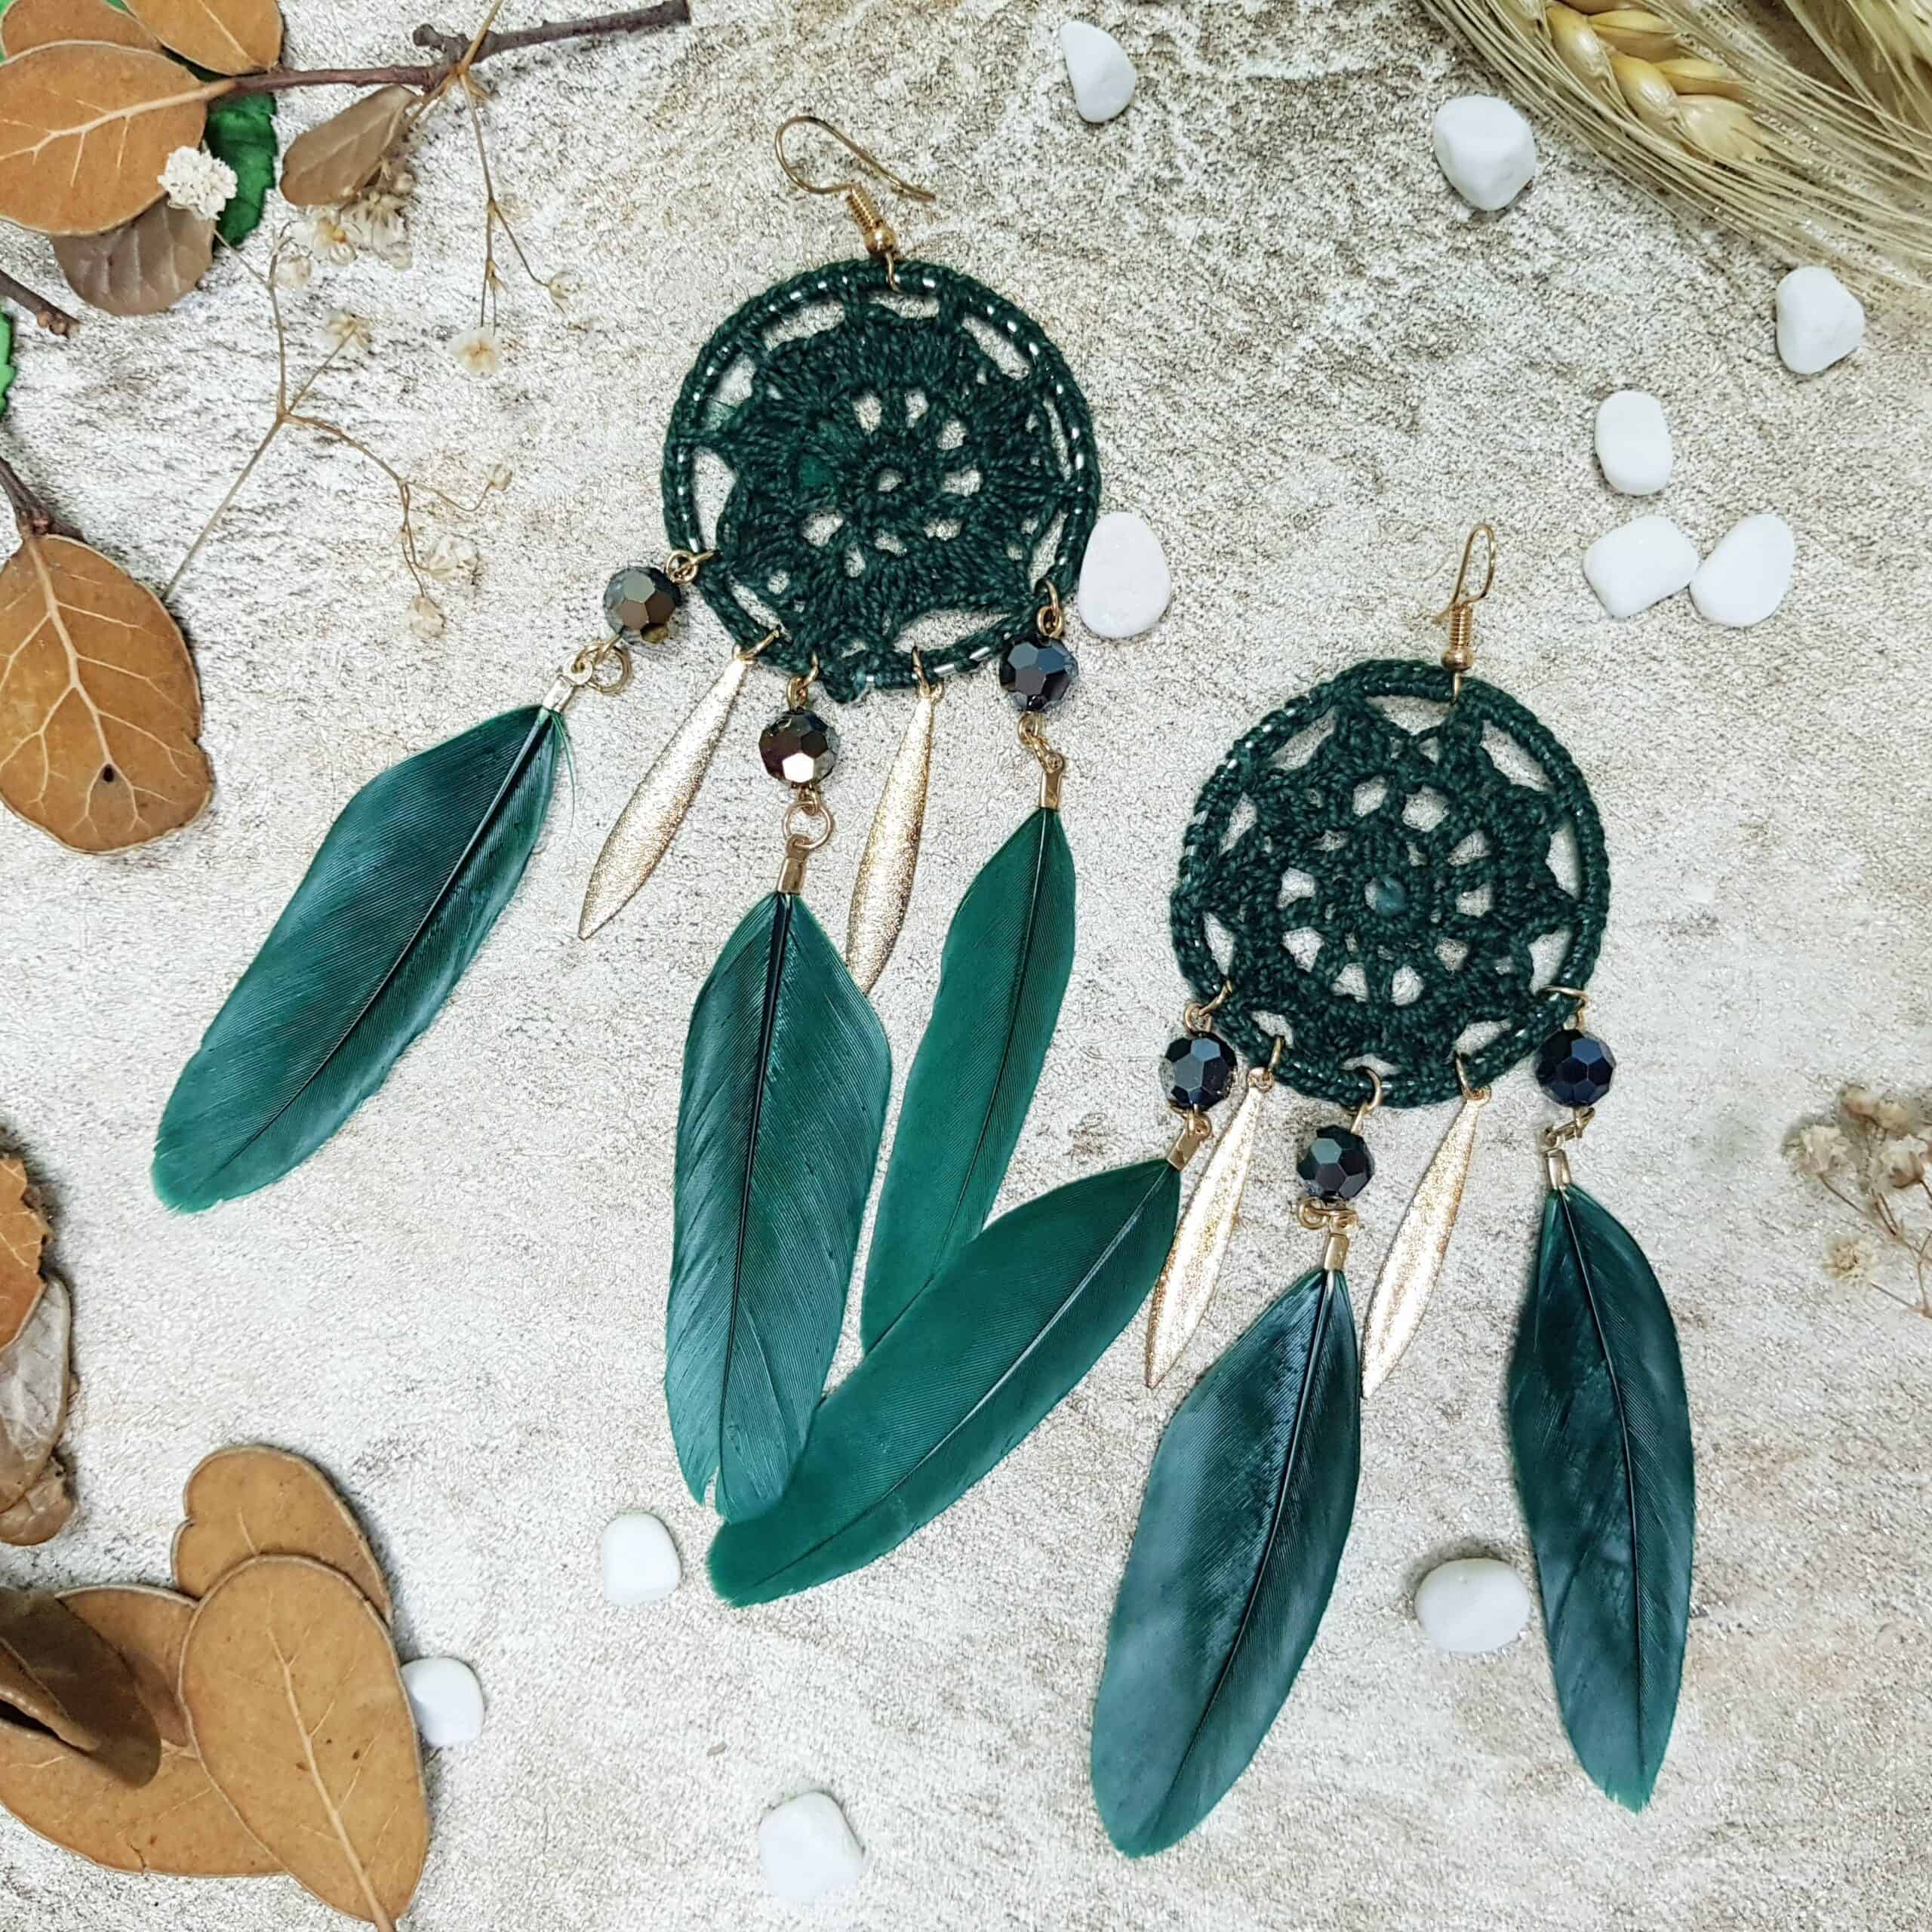 SALE*HANDCRAFTED NATURAL TURQUOISE SILVER DREAM-CATCHER EARRINGS-.925  EARWIRES#3 | eBay